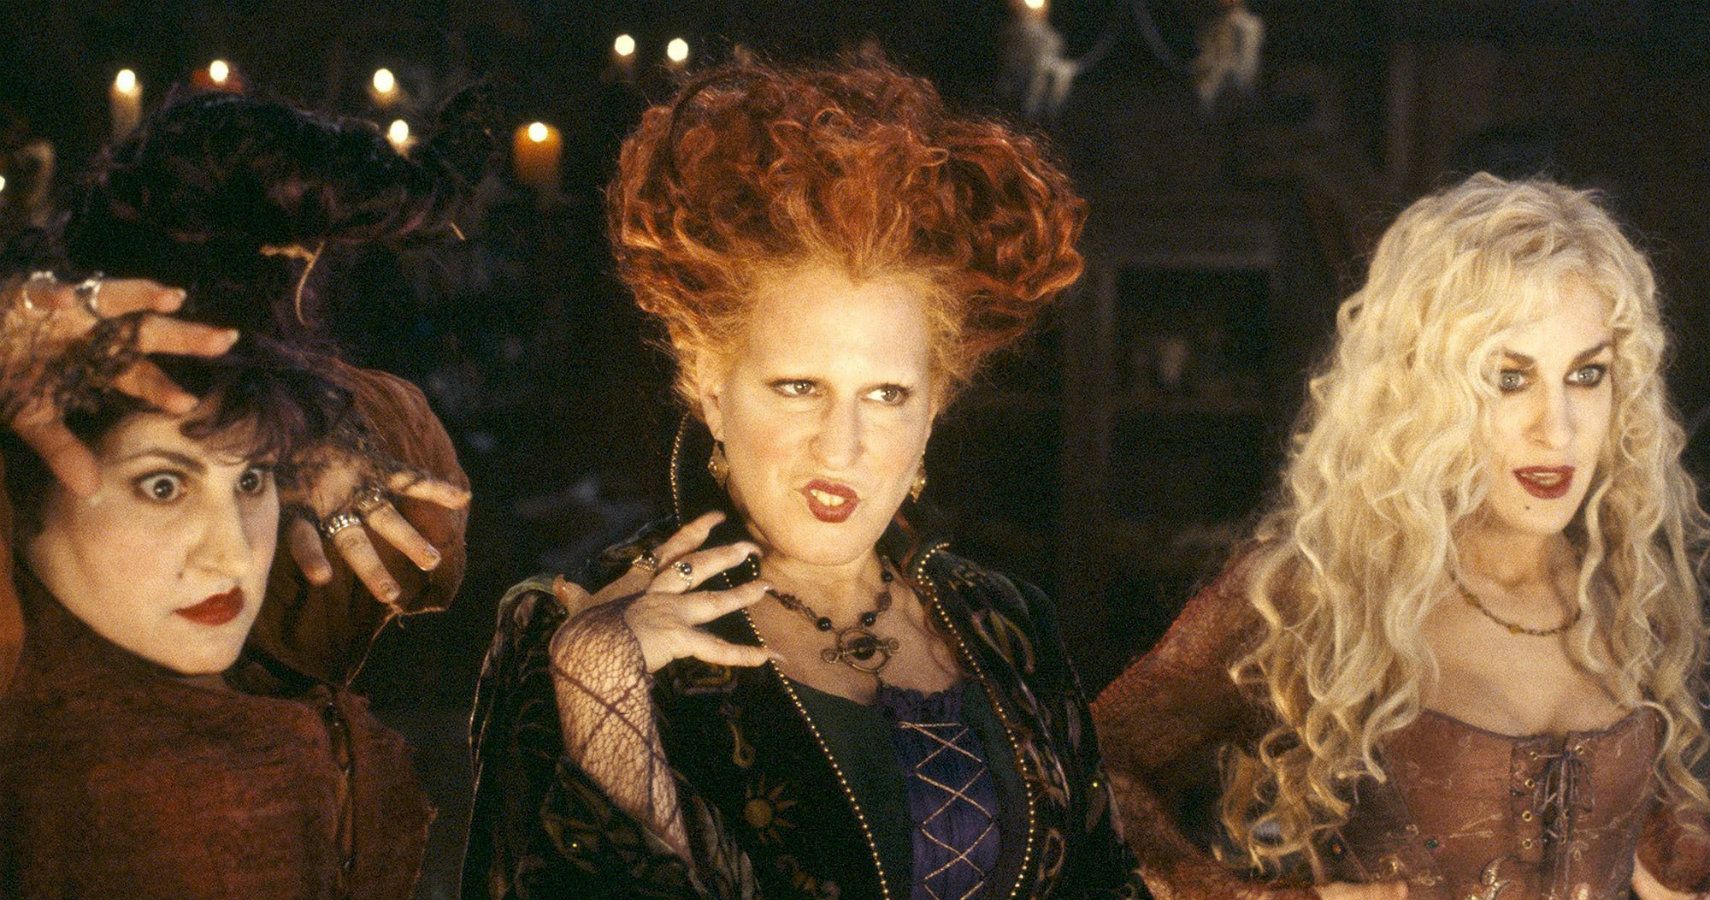 Hocus Pocus: 10 Things That Have Aged Poorly In The Disney Classic